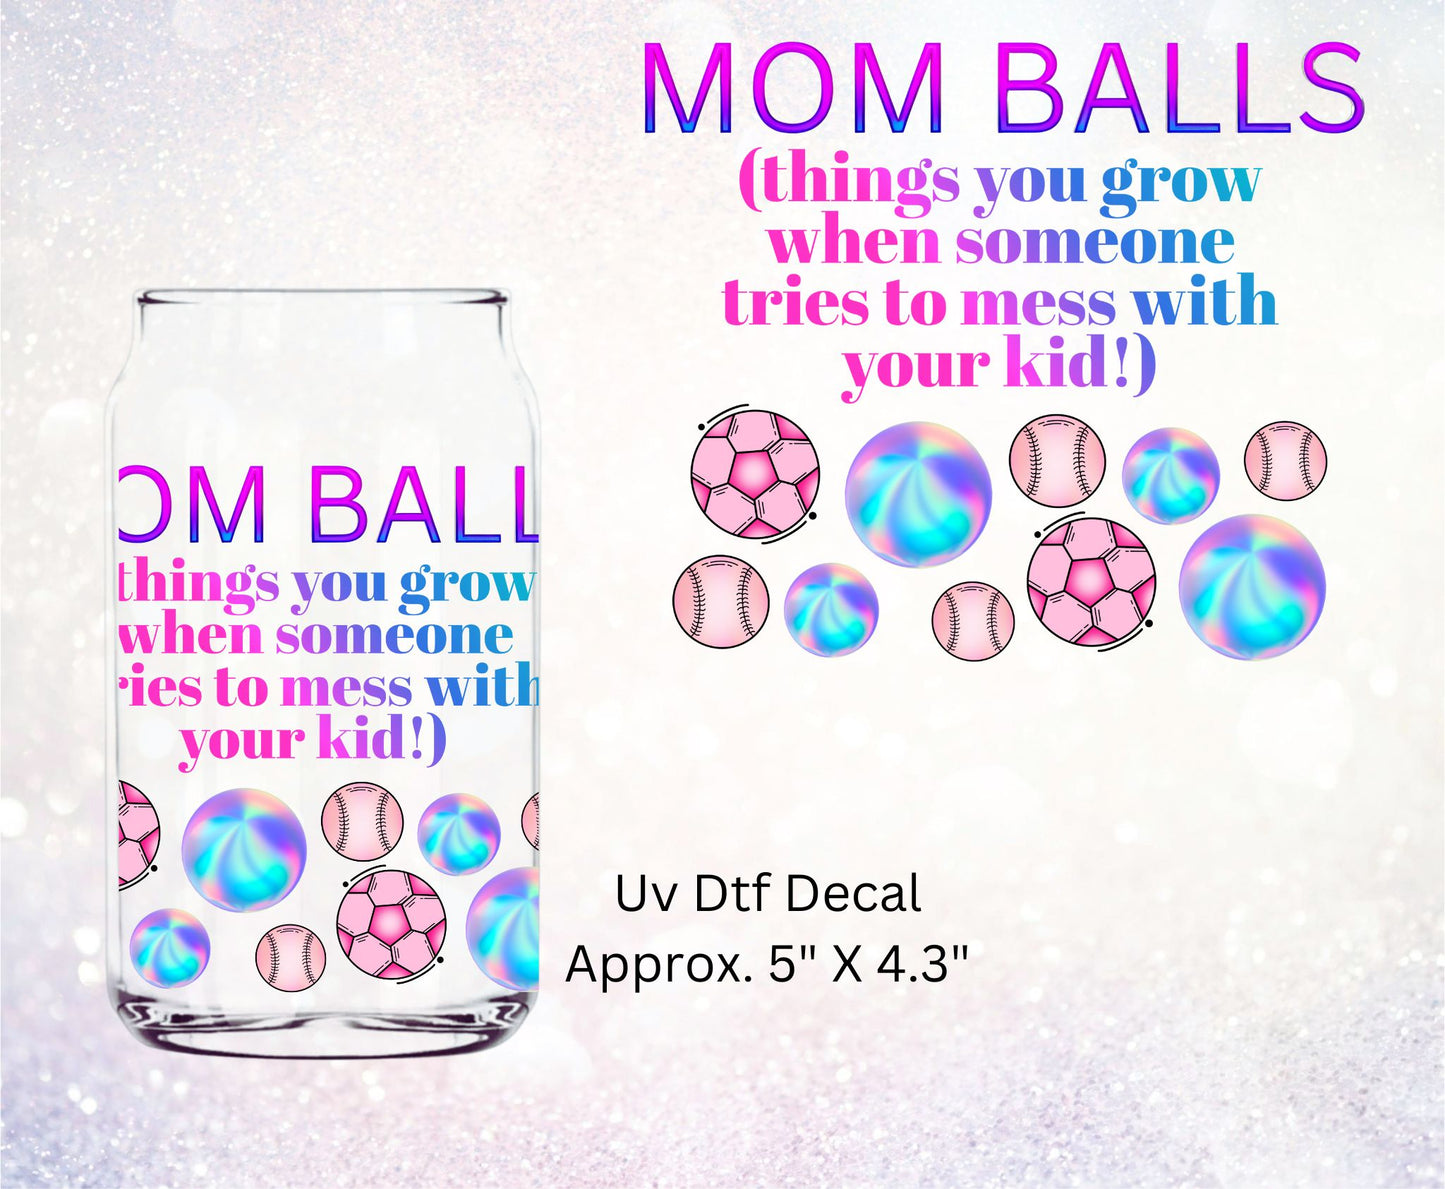 UV Dtf Decal Mom Balls (things you grow when someone tries to mess with your kid!)